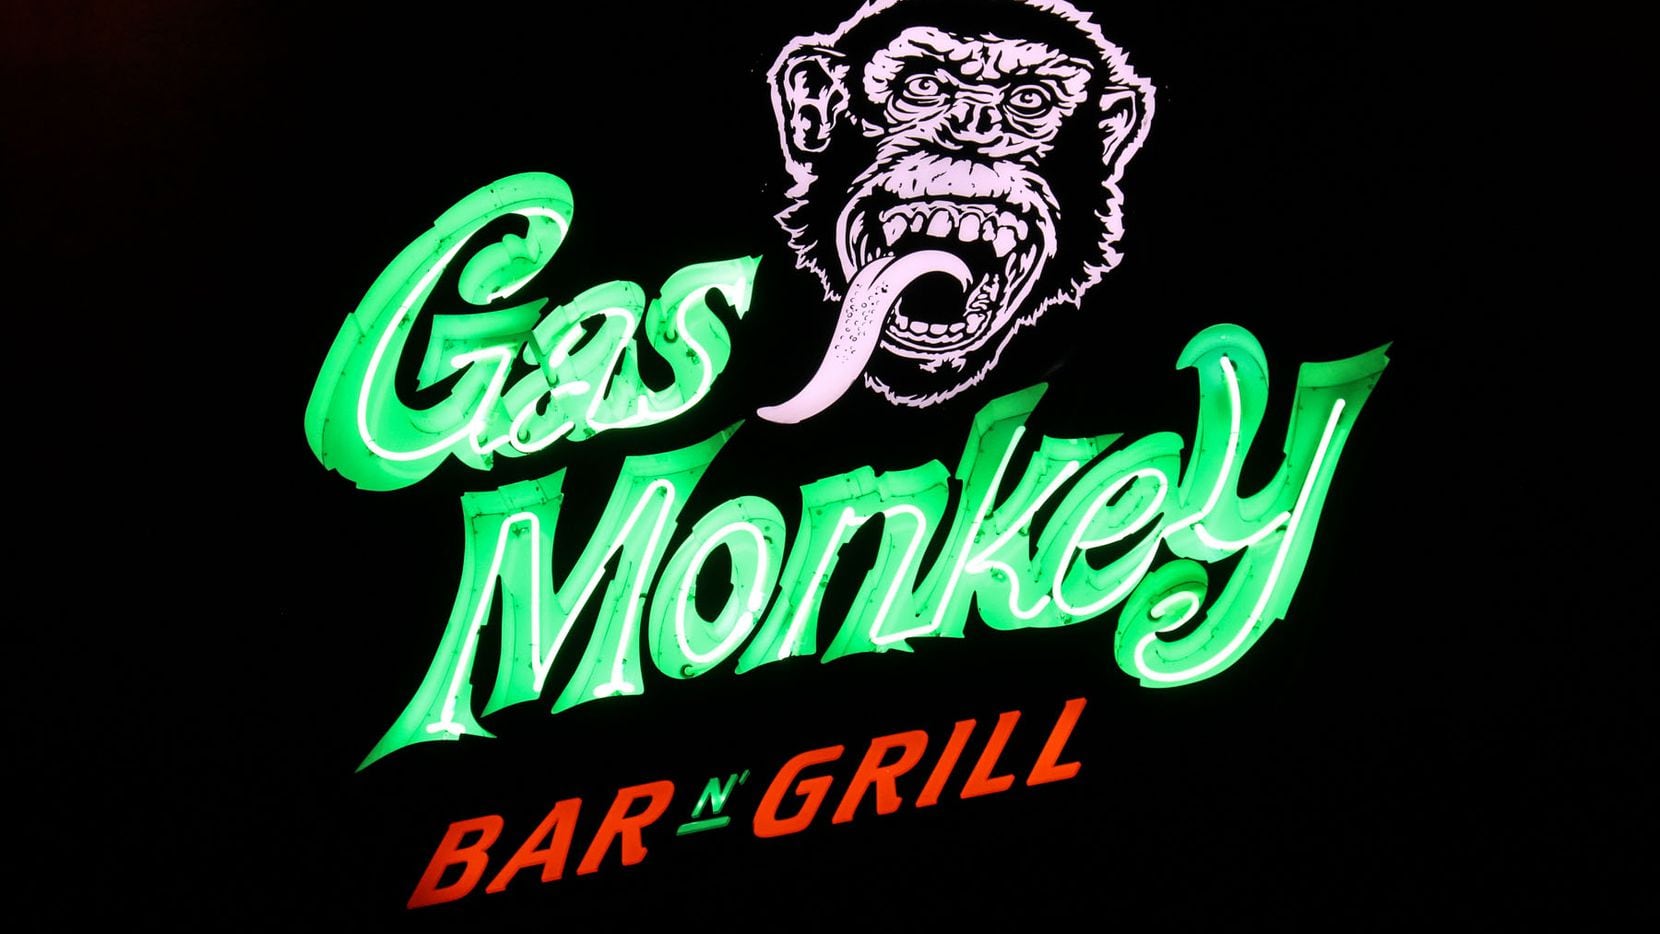 Gas monkey bar and grill